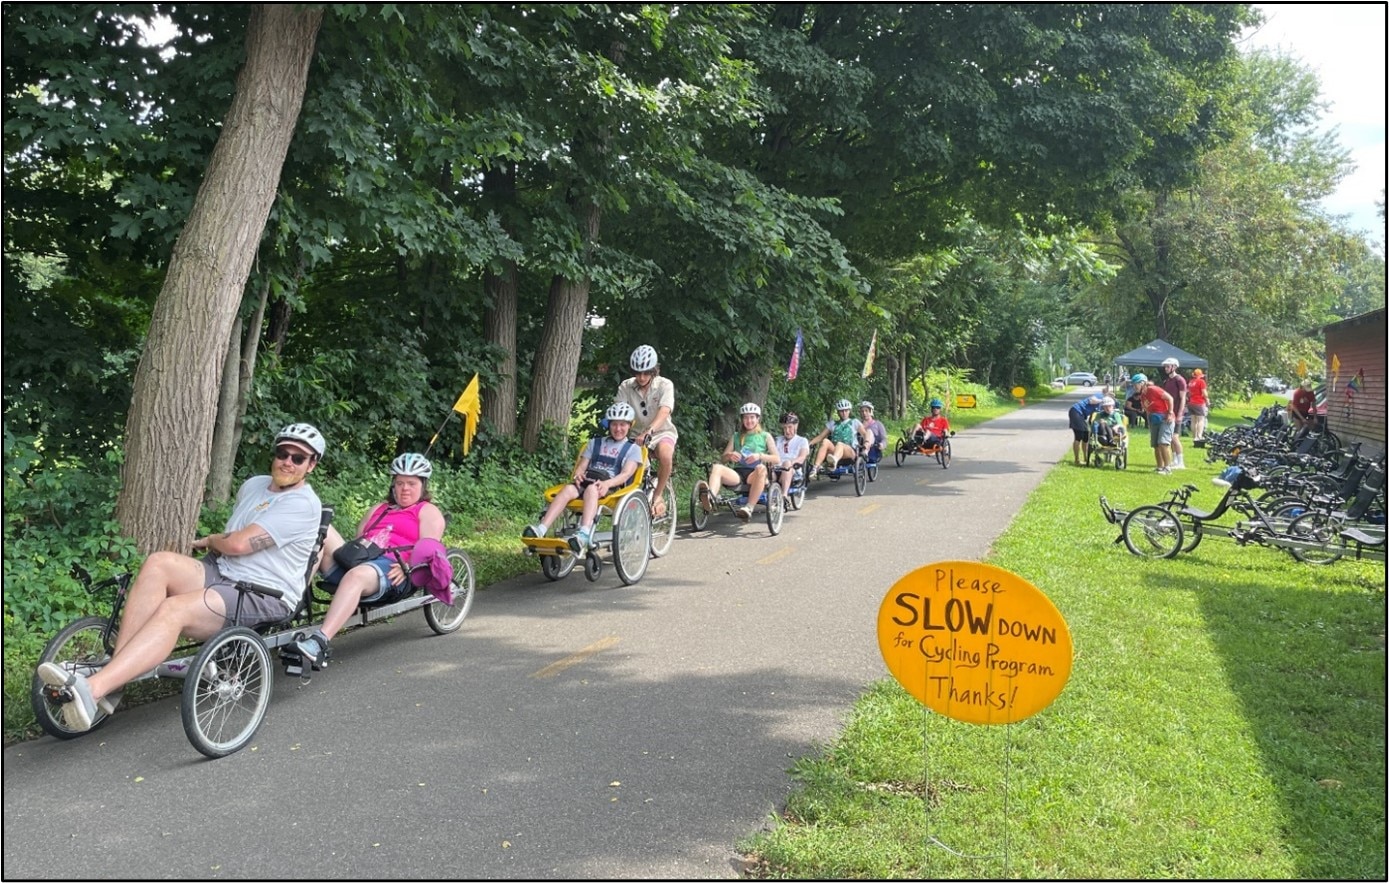 A group of bicyclists riding different types of bikes are travelling down a paved bike path.  There are a variety of bikes parked on the side of the path and a sign in front which says "Please Slow Down for Cycling Program. Thanks!"